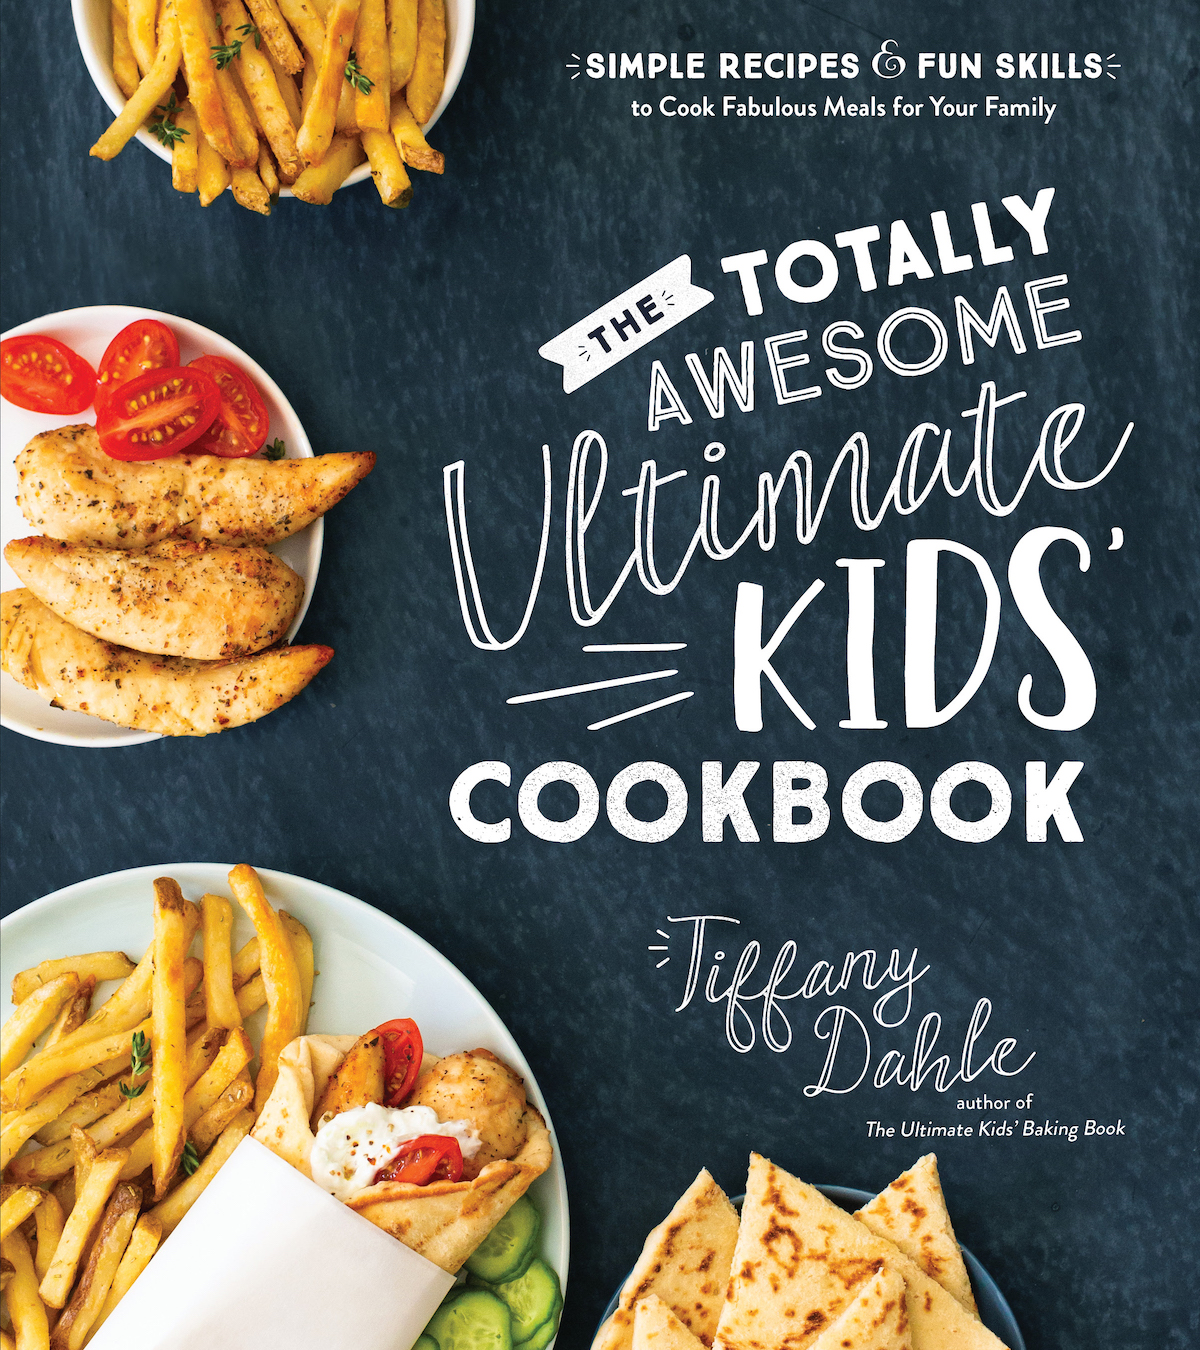 The cover of The Totally Awesome Ultimate Kids' Cookbook by Tiffany Dahle